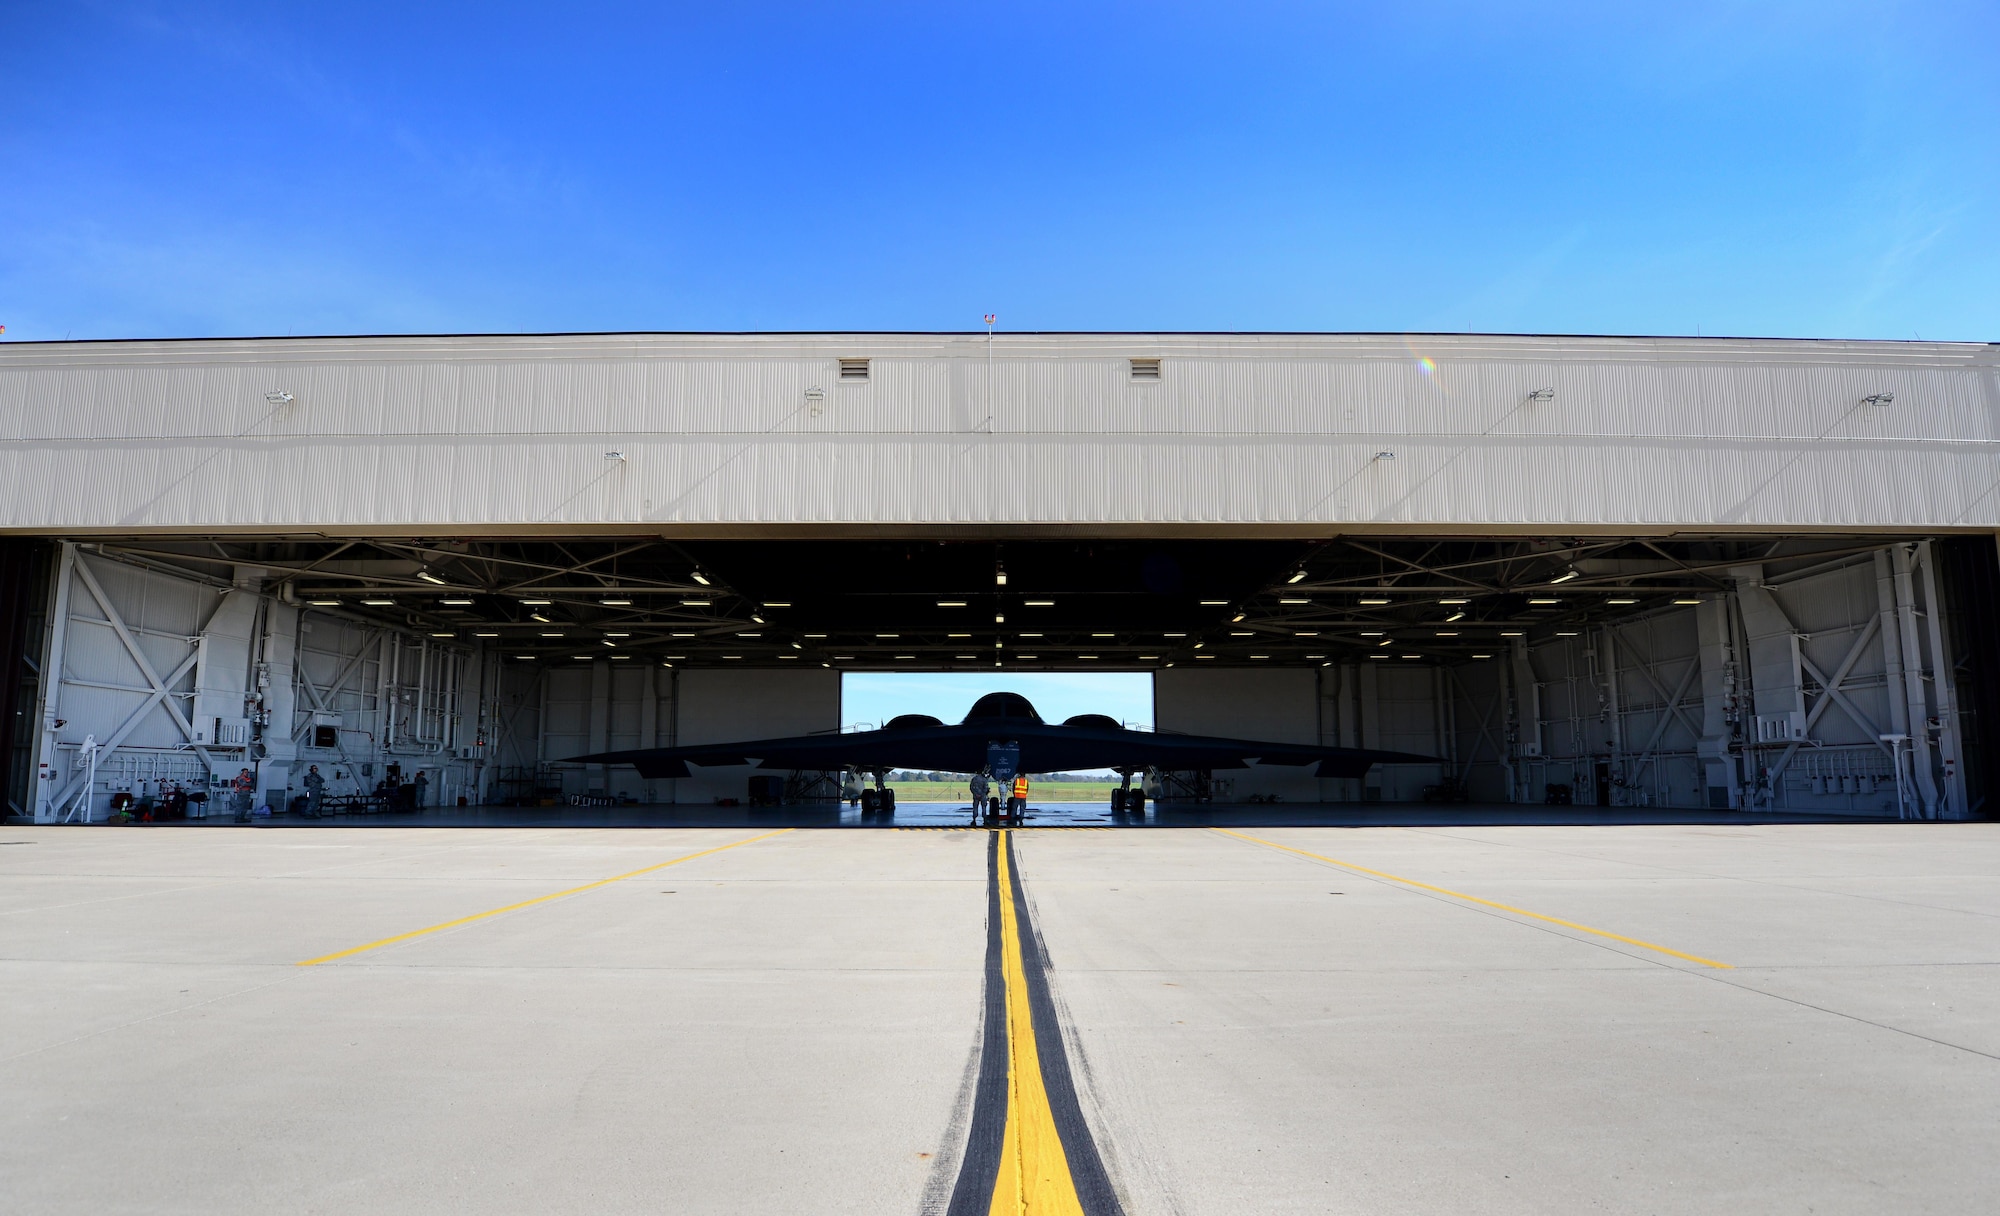 U.S. Air Force B-2 Spirit aircraft assigned to the 509th Bomb Wing, sits in the docks while crew is performing pre-flight checks during Global Thunder 17, at Whiteman Air Force Base, Mo., Oct. 27, 2016. Exercise Global Thunder is an annual command and control and field training exercise designed to train Department of Defense forces and assess joint operational readiness across all of USSTRATCOM’s mission areas, with a specific focus on nuclear readiness. The exercise provides training opportunities for USSTRATCOM components, task forces, units and command posts to deter and, if necessary, defeat a military attack against the United States and to employ forces as directed by the President.
(U.S. Air Force photo by Tech. Sgt. Andy Kin)
